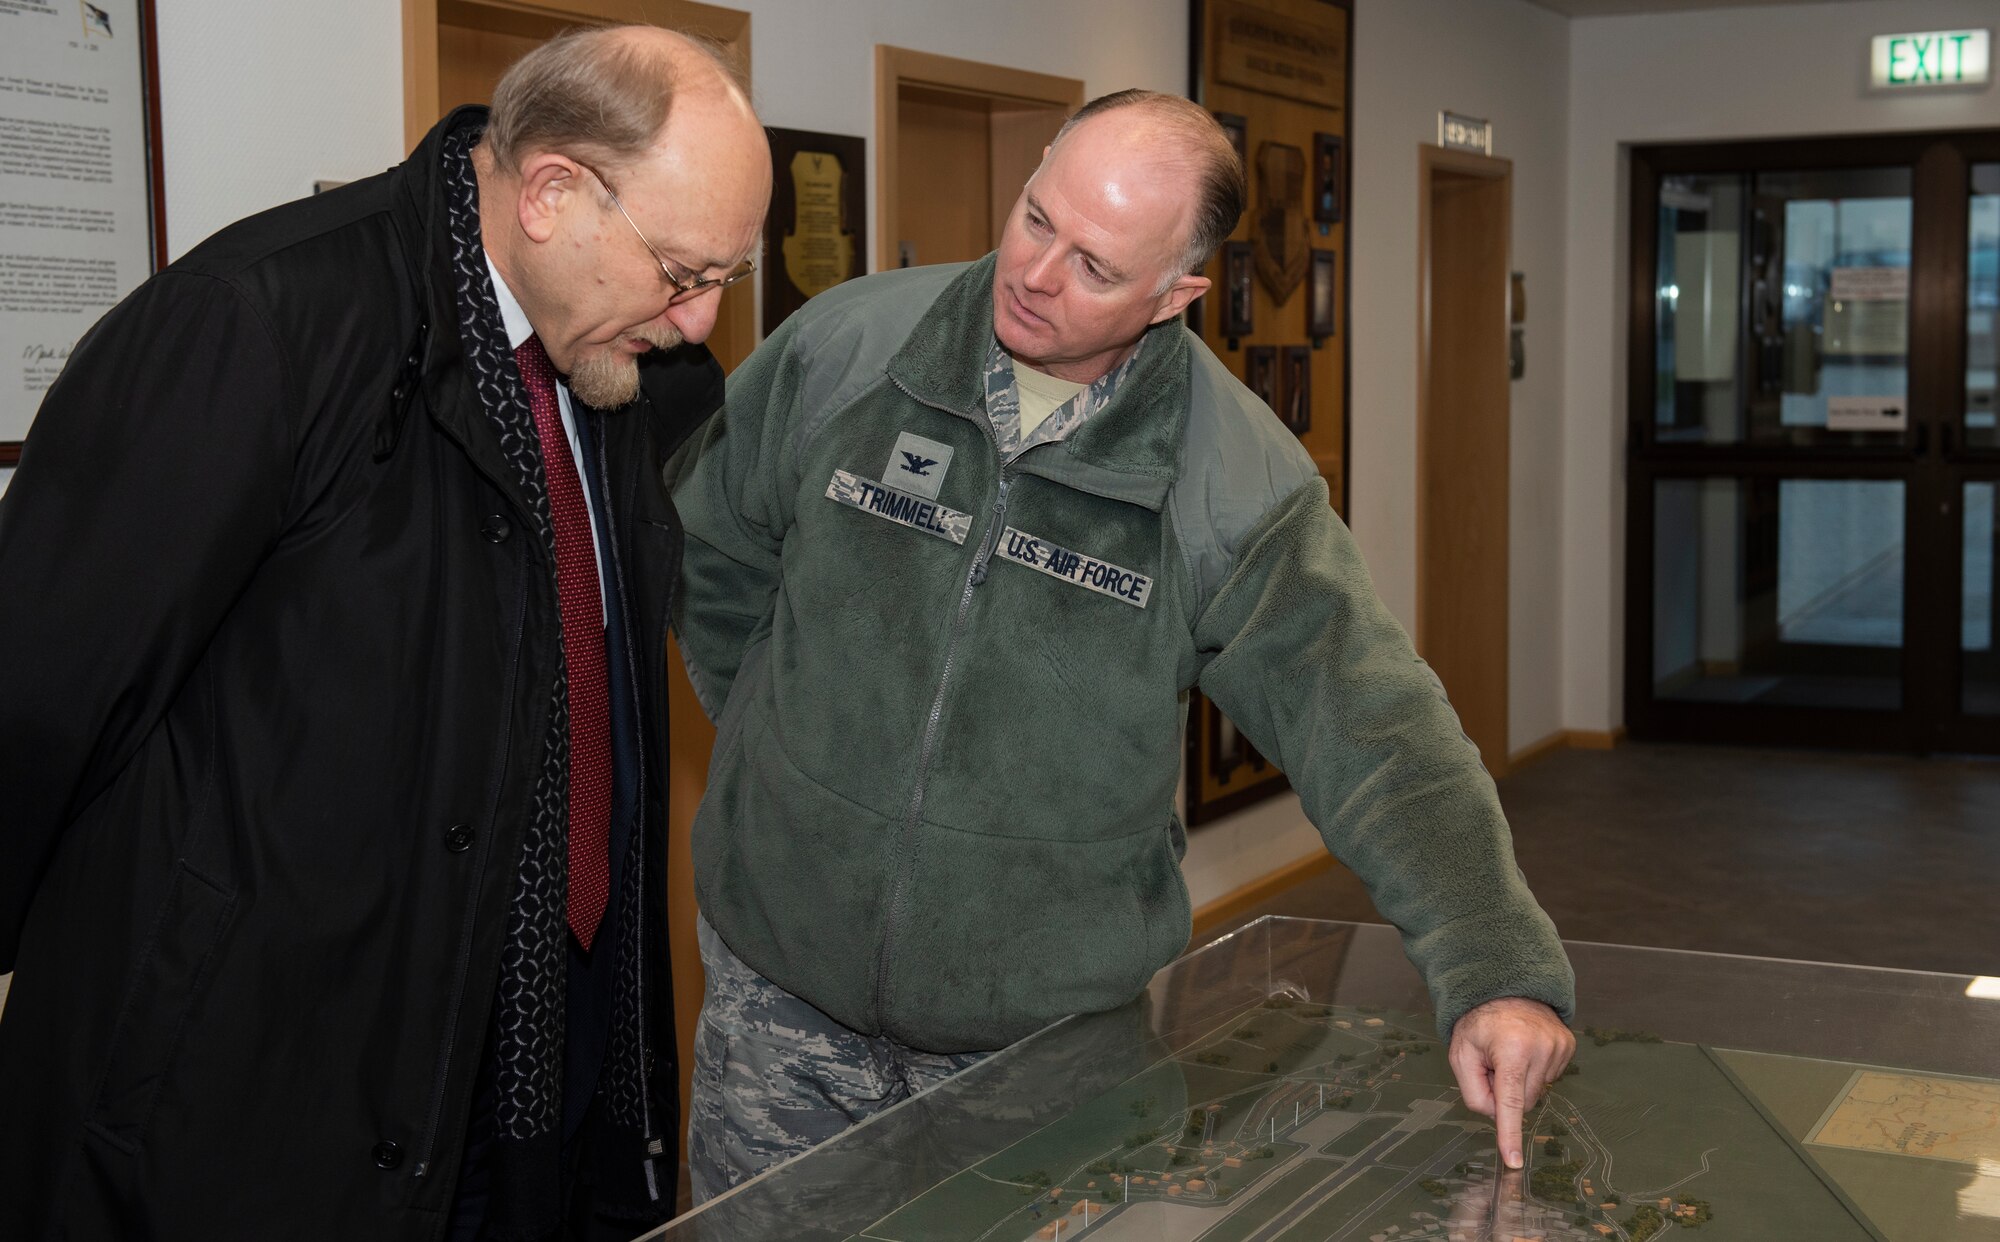 Dr. Heinrich Kreft, German ambassador to Luxembourg, left, and U.S. Air Force Col. Timothy Trimmel, 52nd Maintenance Group commander, center, view a model of Spangdahlem Air Base at Spangdahlem AB, Germany, January 13, 2020. Kreft toured the base and visited an aircraft hangar and a control tower to learn about how Airmen at Spangdahlem contribute to the mission. (U.S. Air Force photo by Airman 1st Class Alison Stewart)